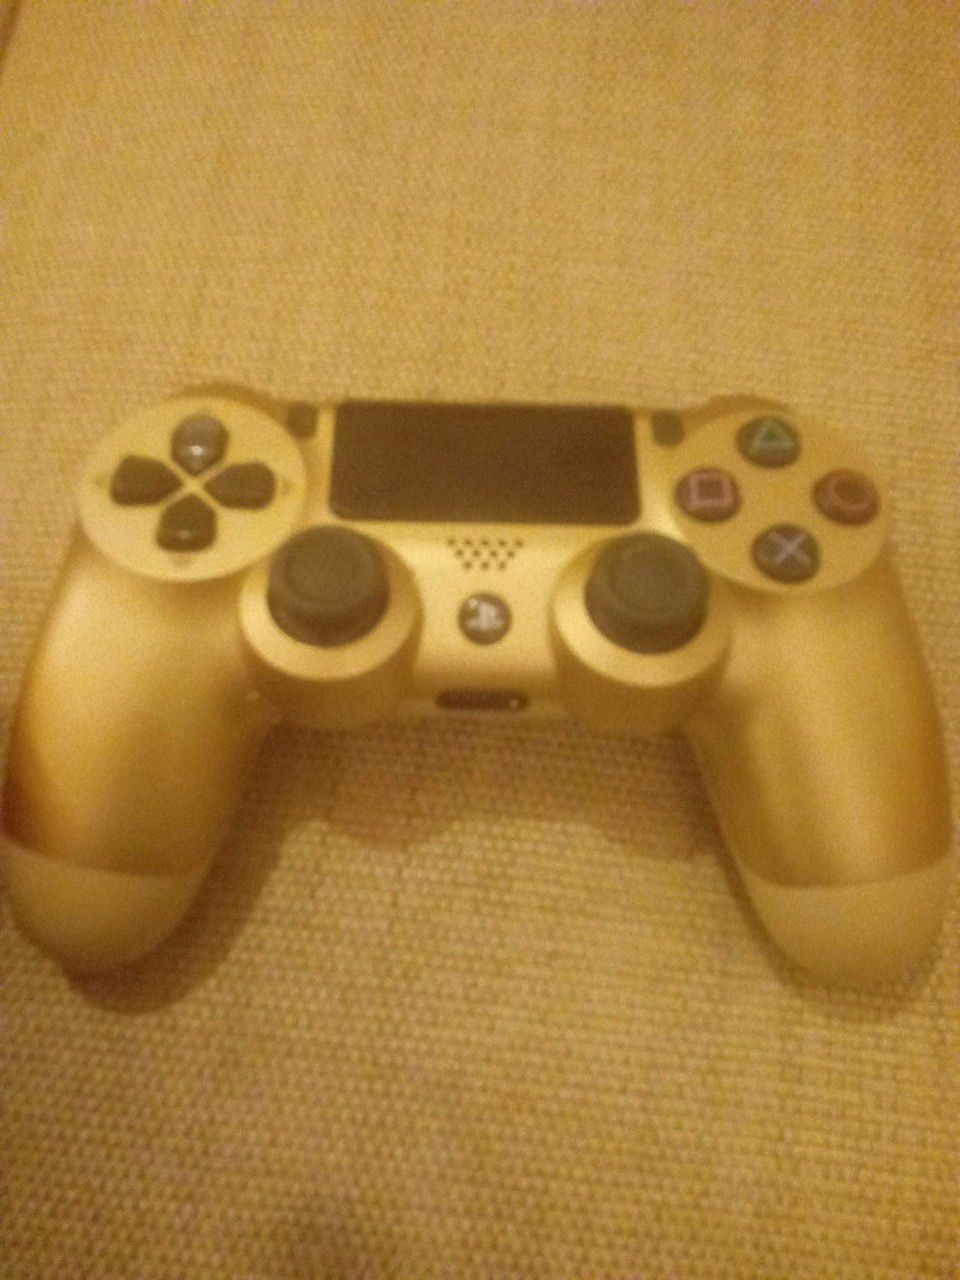 PS4 controller gold